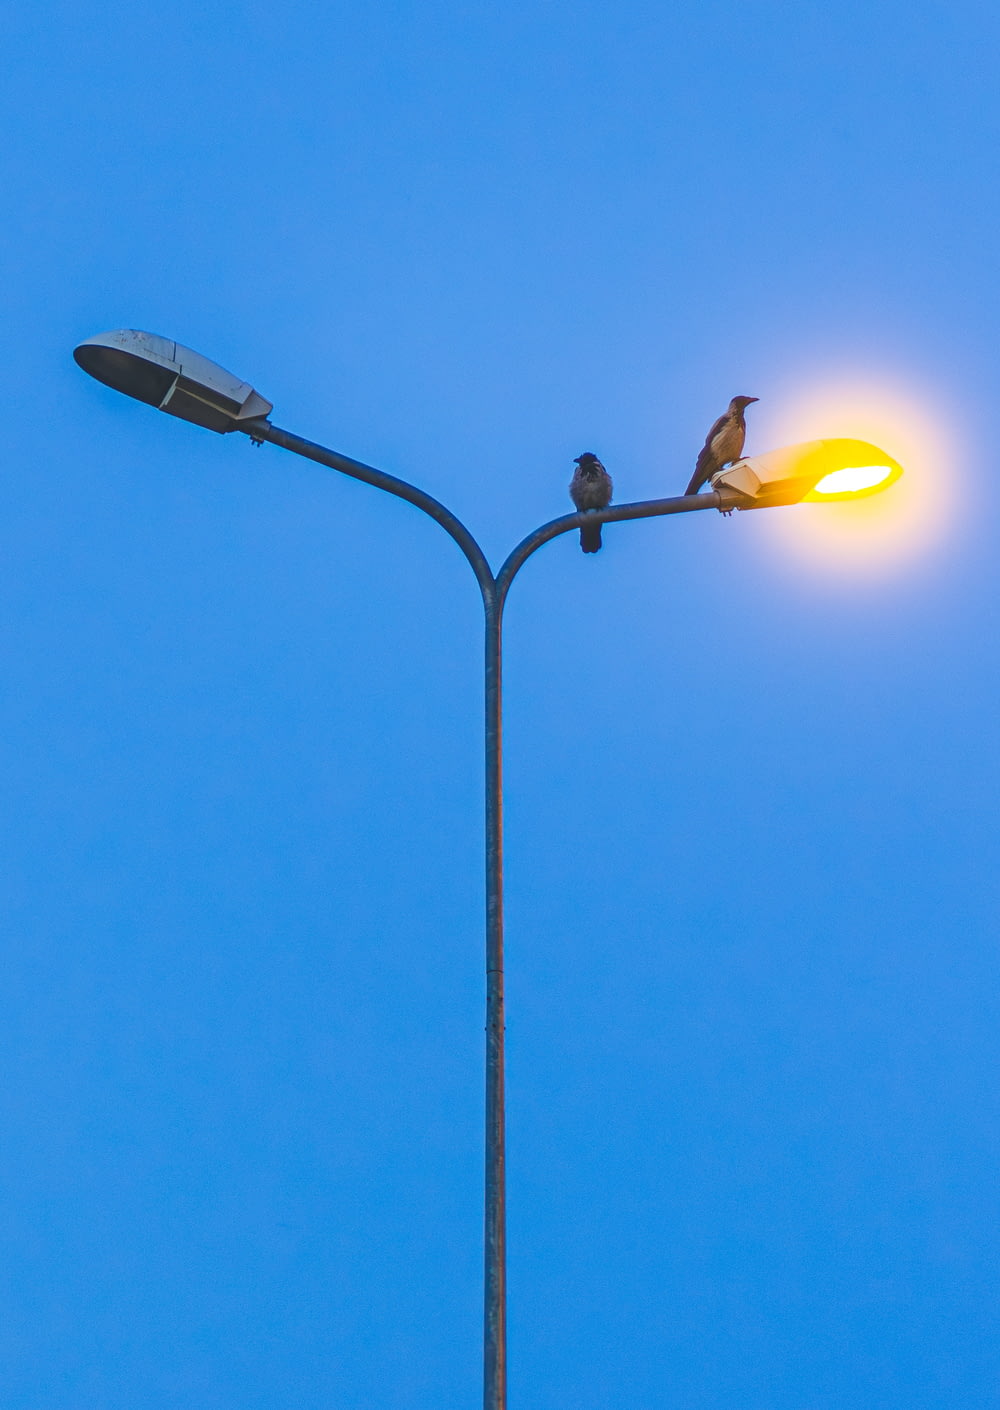 two birds are perched on a street light